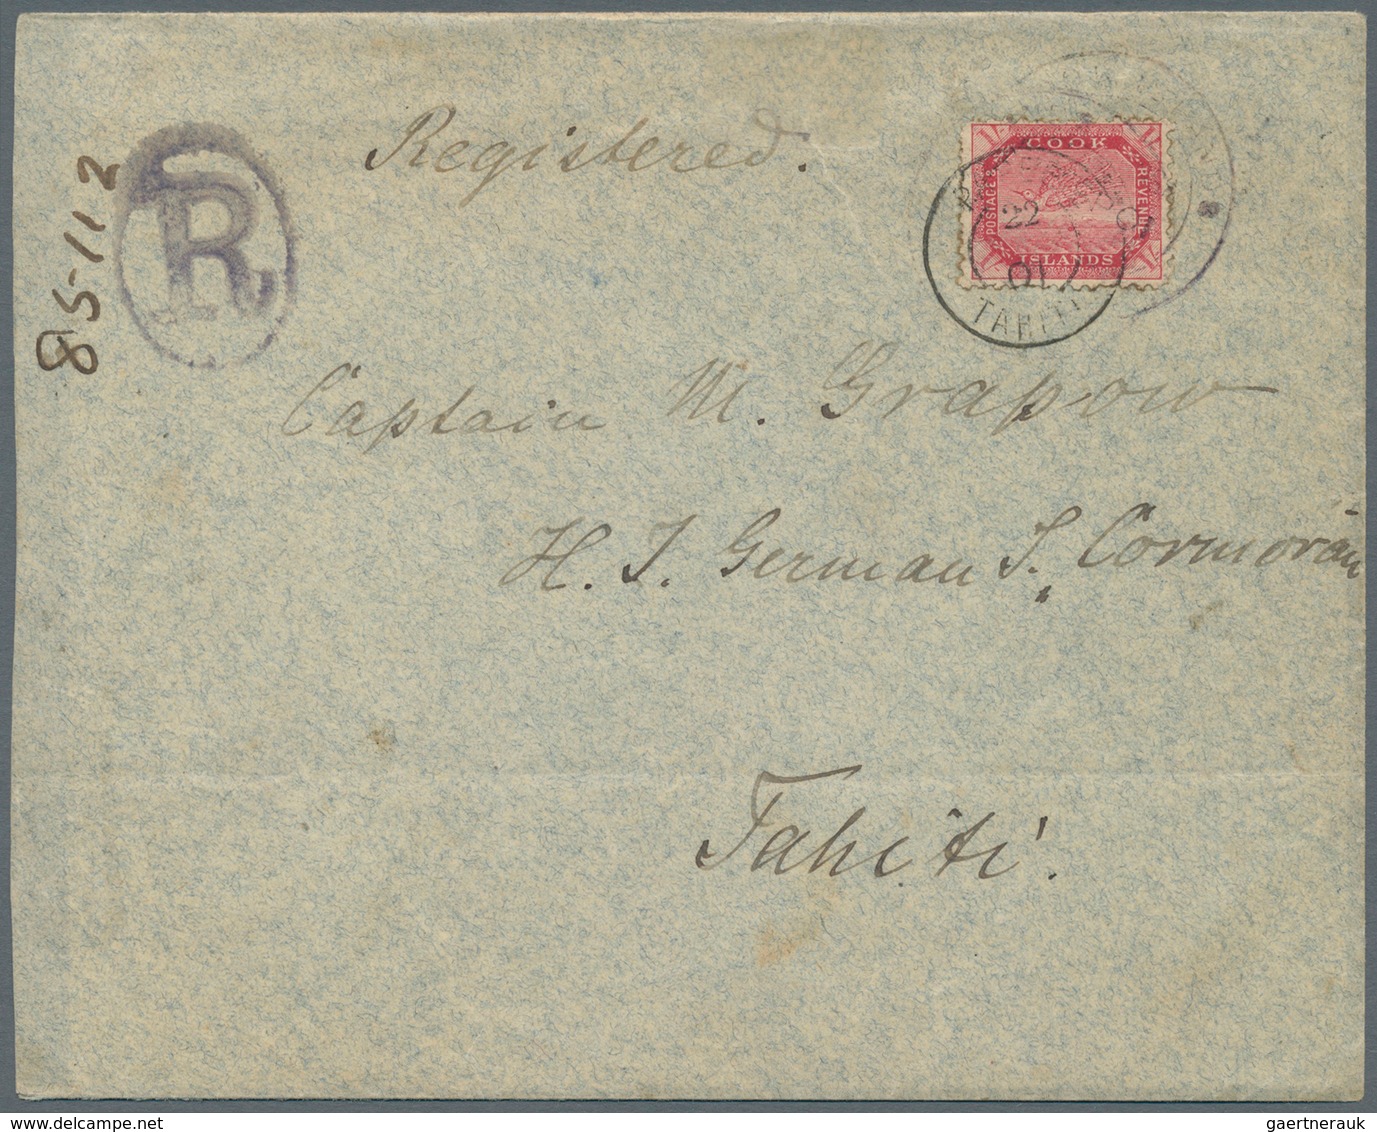 Cook-Inseln: 1901, Angel Tern 1 Sh. Carmin Tied By Cds. "COOK ISLAND...SE.01" To Registered Cover Ad - Cook Islands